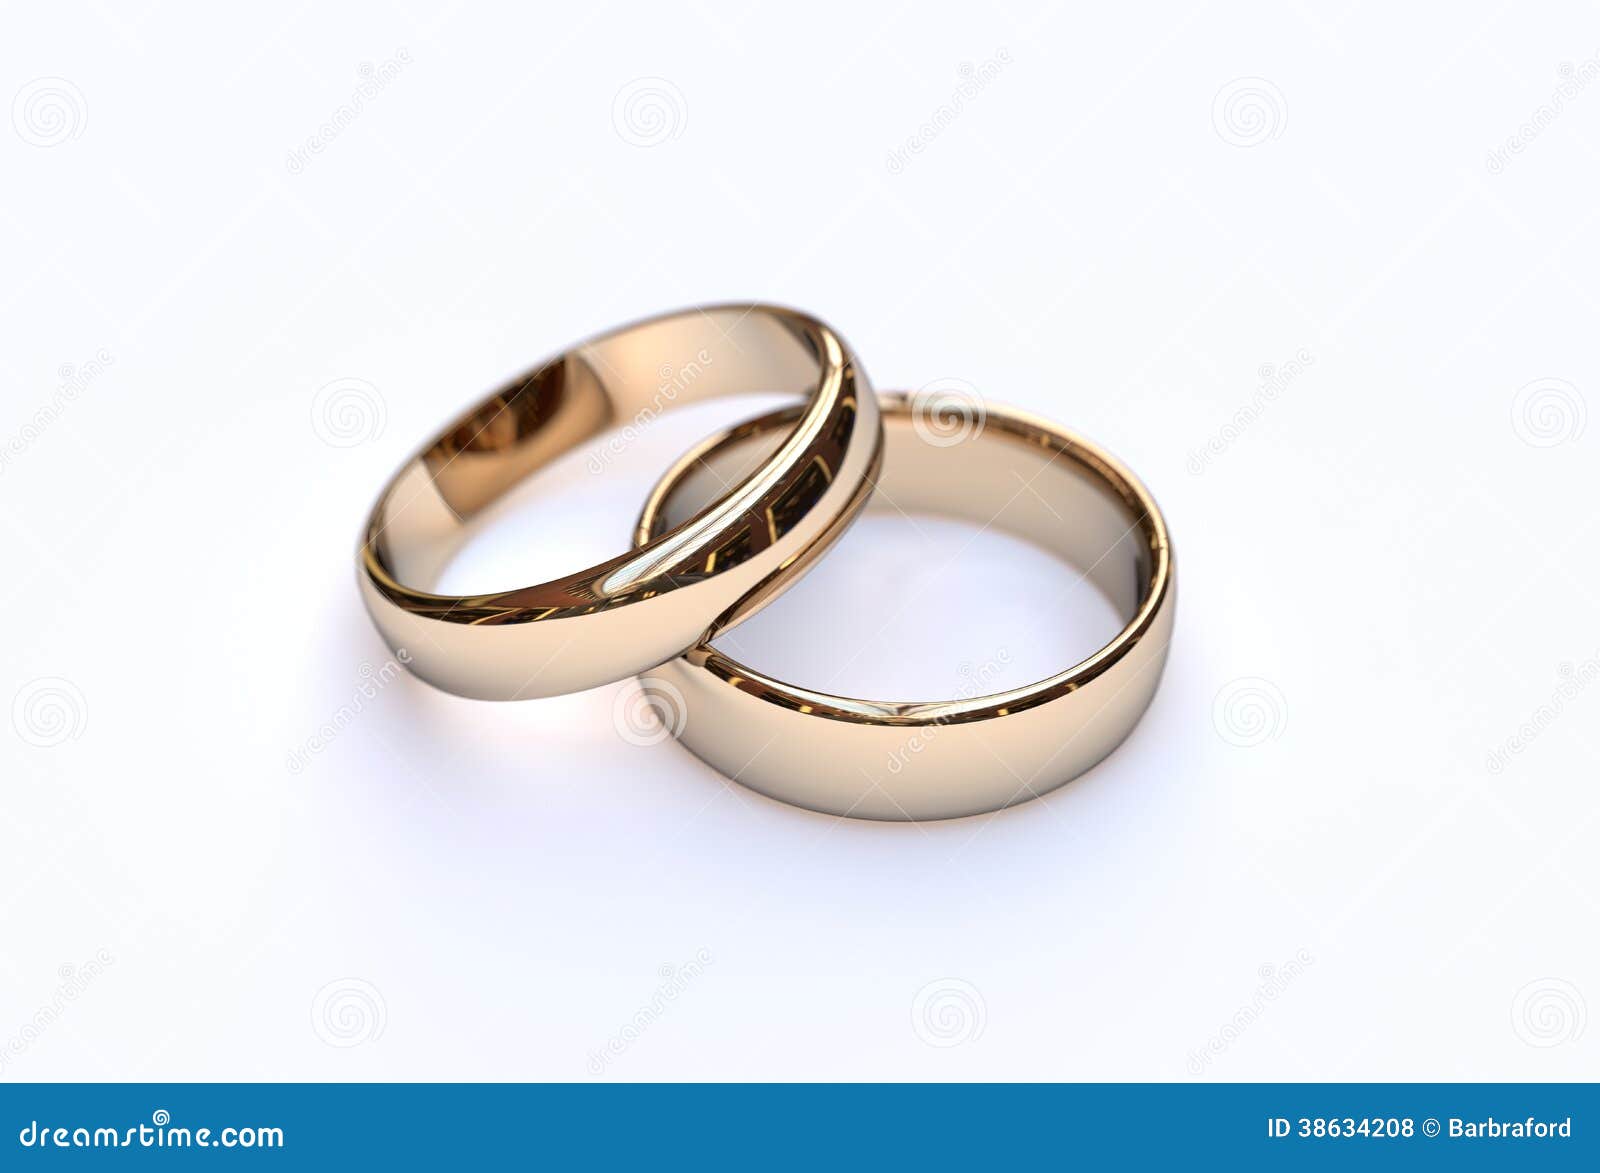 Couple Of Gold  Wedding  Rings  On White  Background  Royalty 